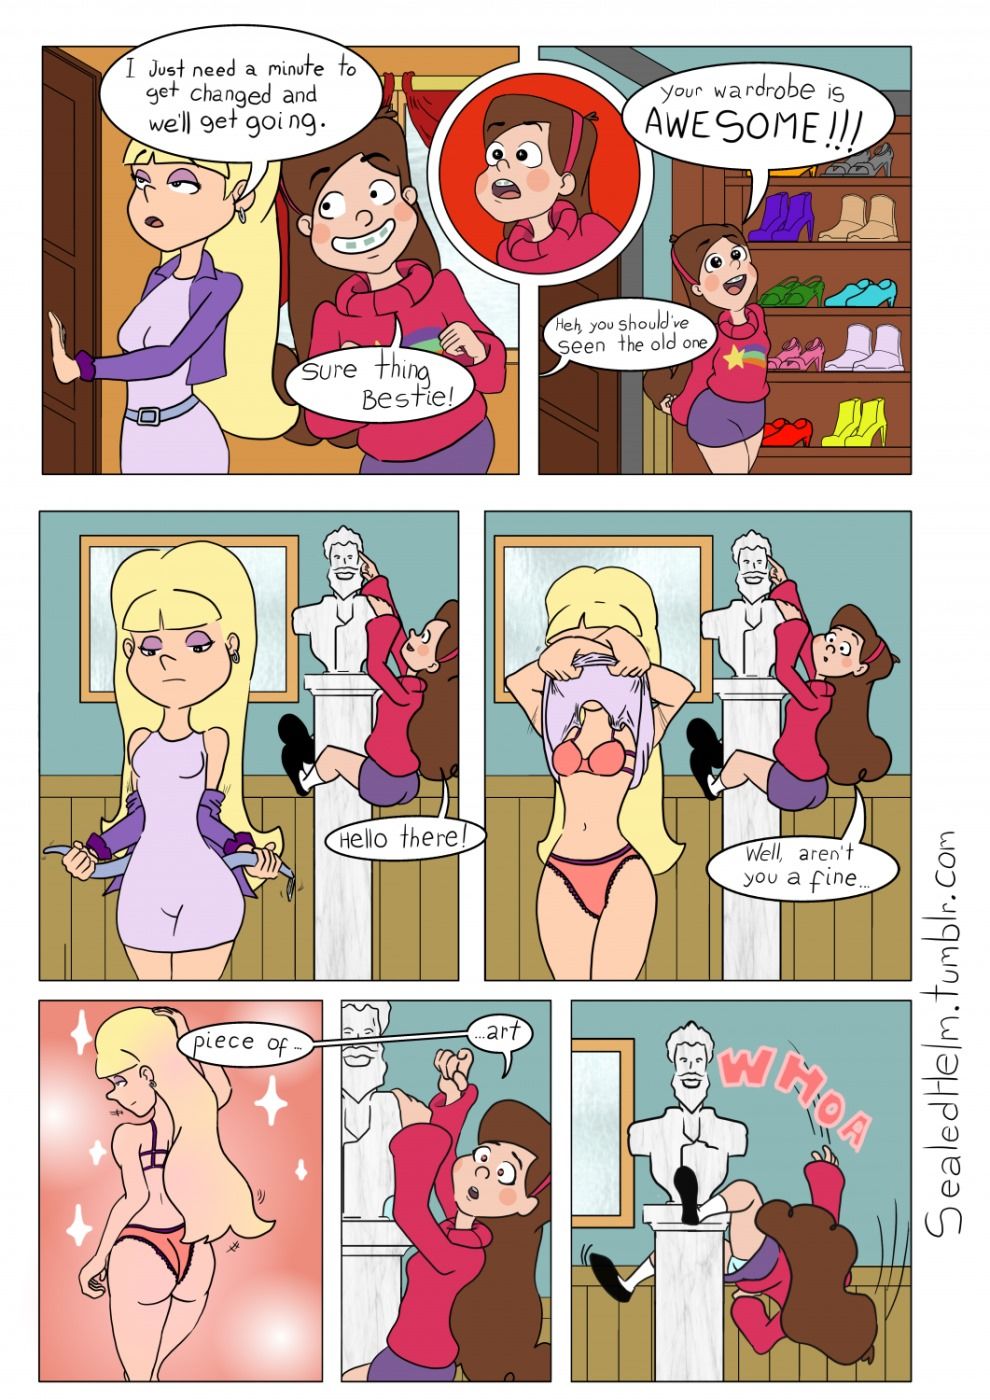 Mable Gravity Falls Porn Shower - Sealedhelm] Gravity Falls - Mabel x Pacifica | Porn Comics